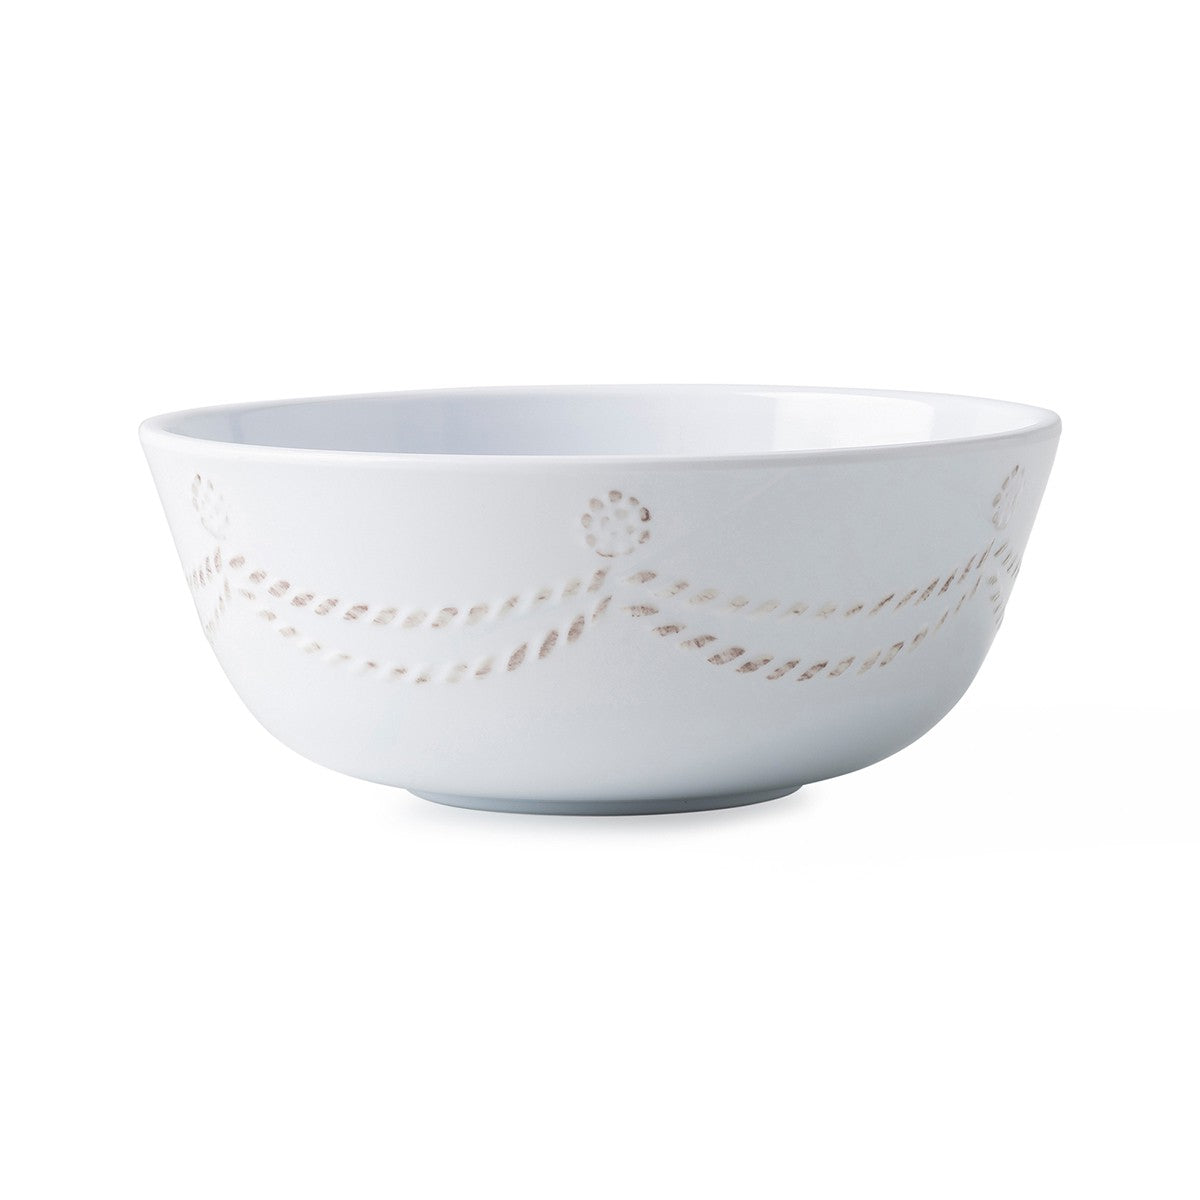 berry and thread melamine cereal bowl on a white background